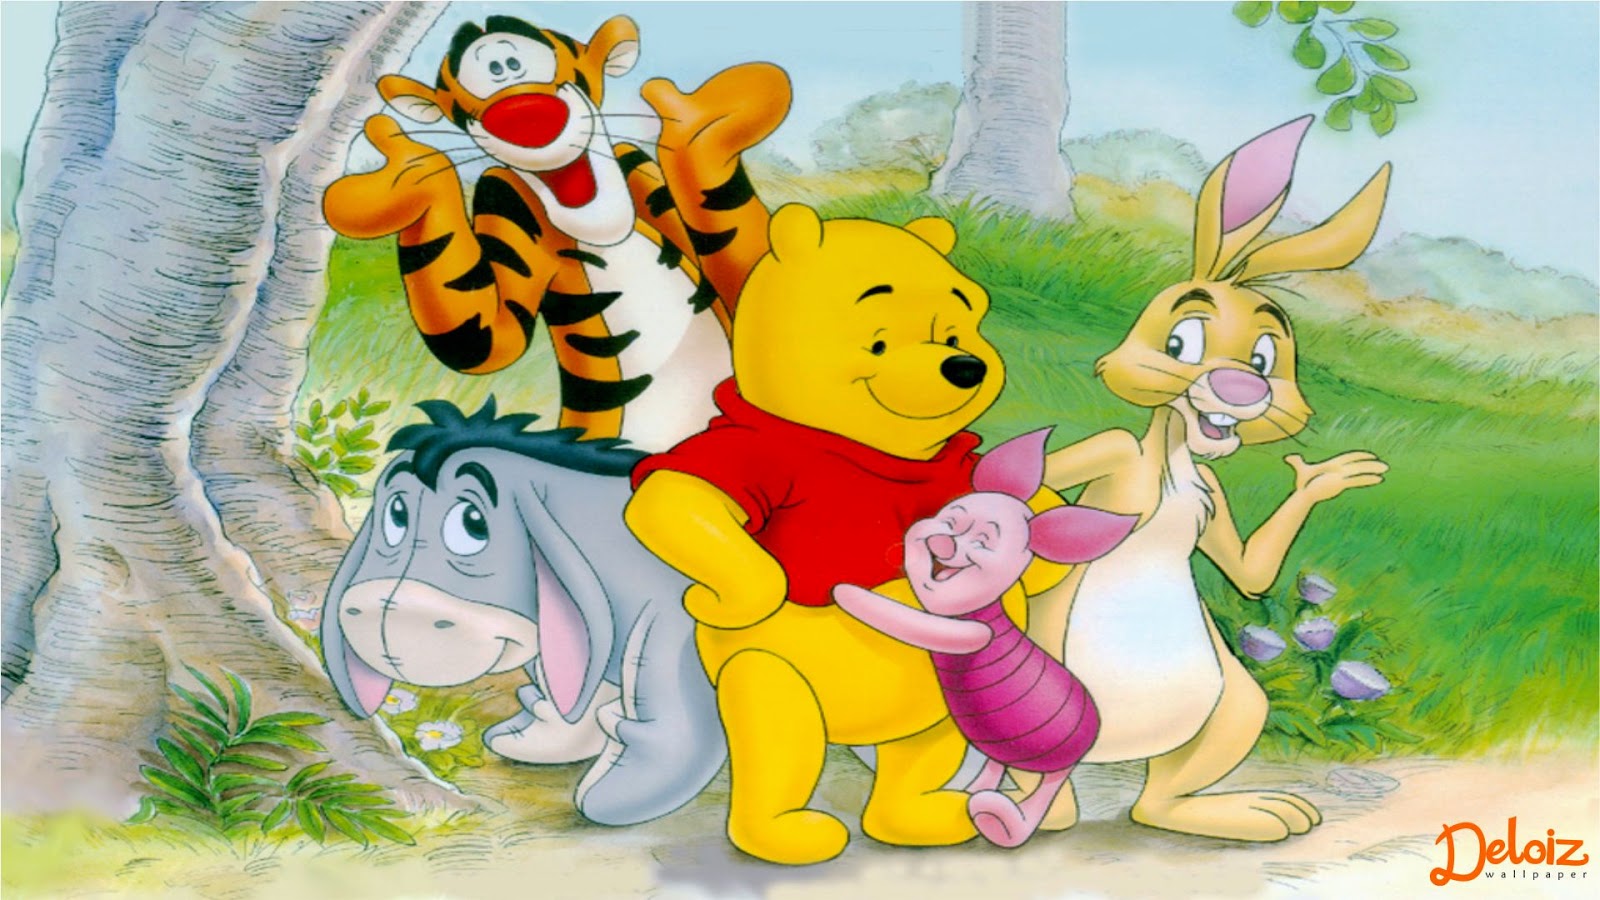 WALLPAPER ANDROID IPHONE Wallpaper Winnie The Pooh HD